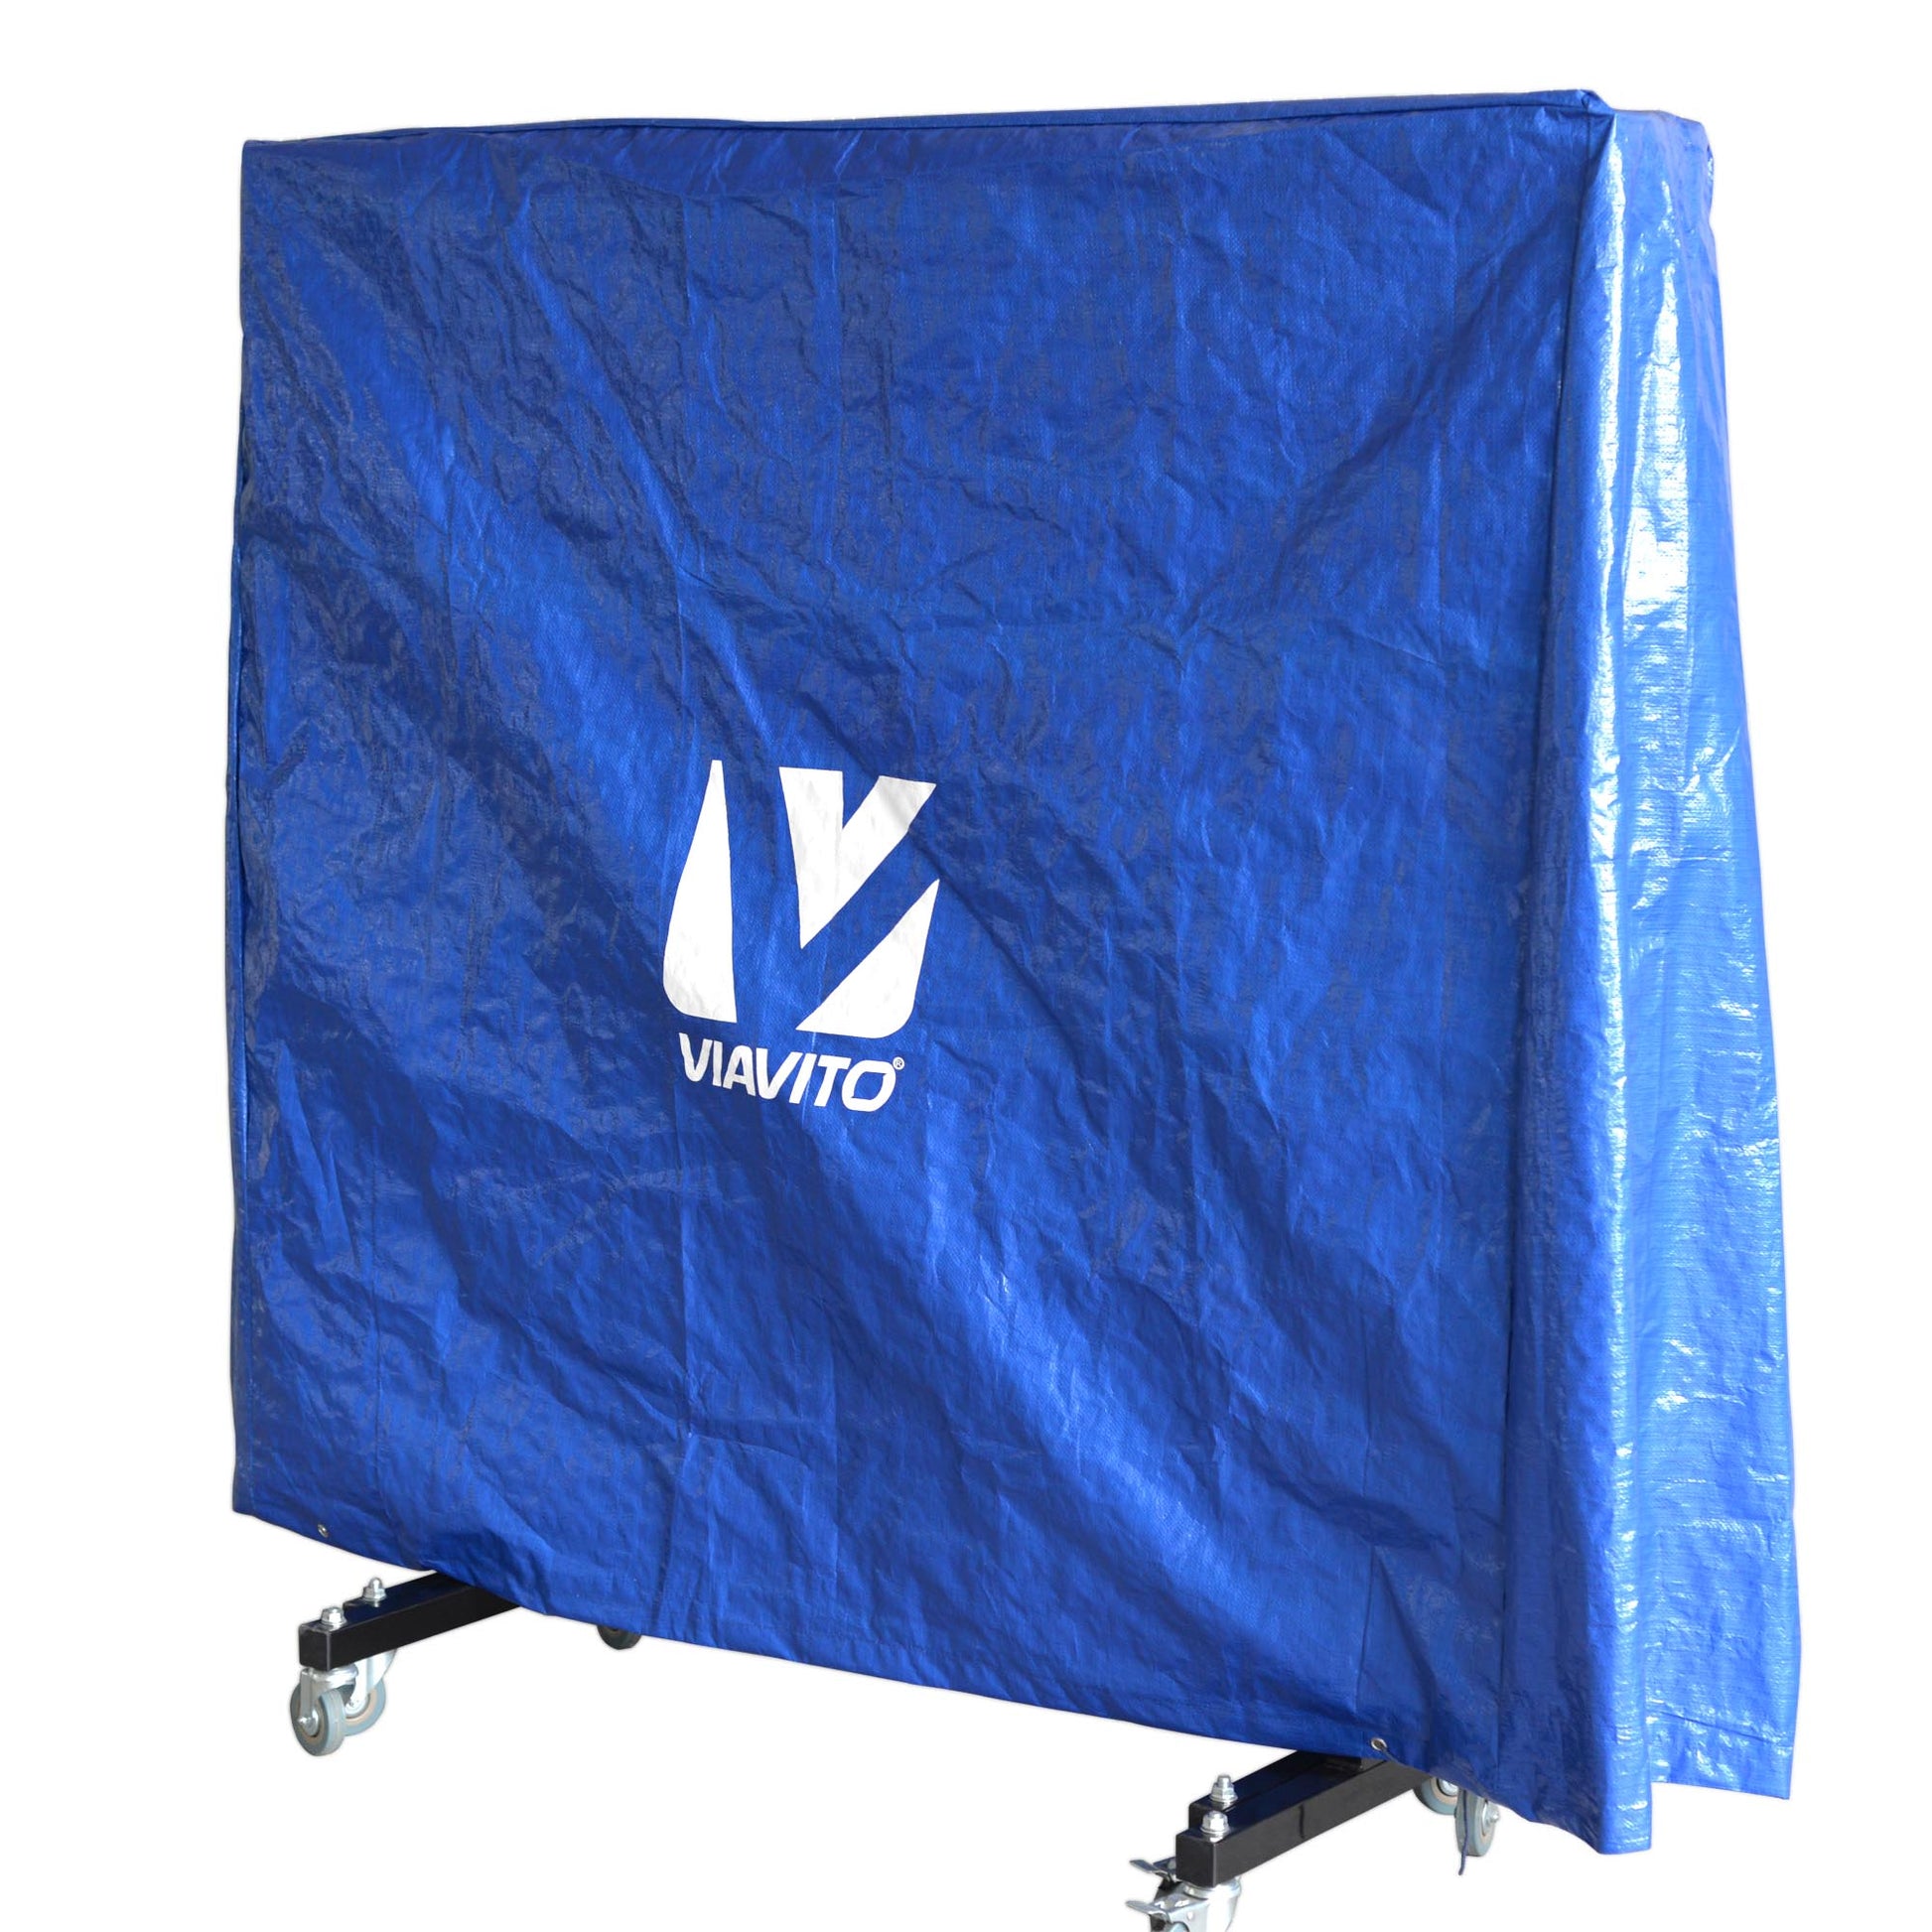 |Viavito Protactic Table Tennis Table Cover - Side|